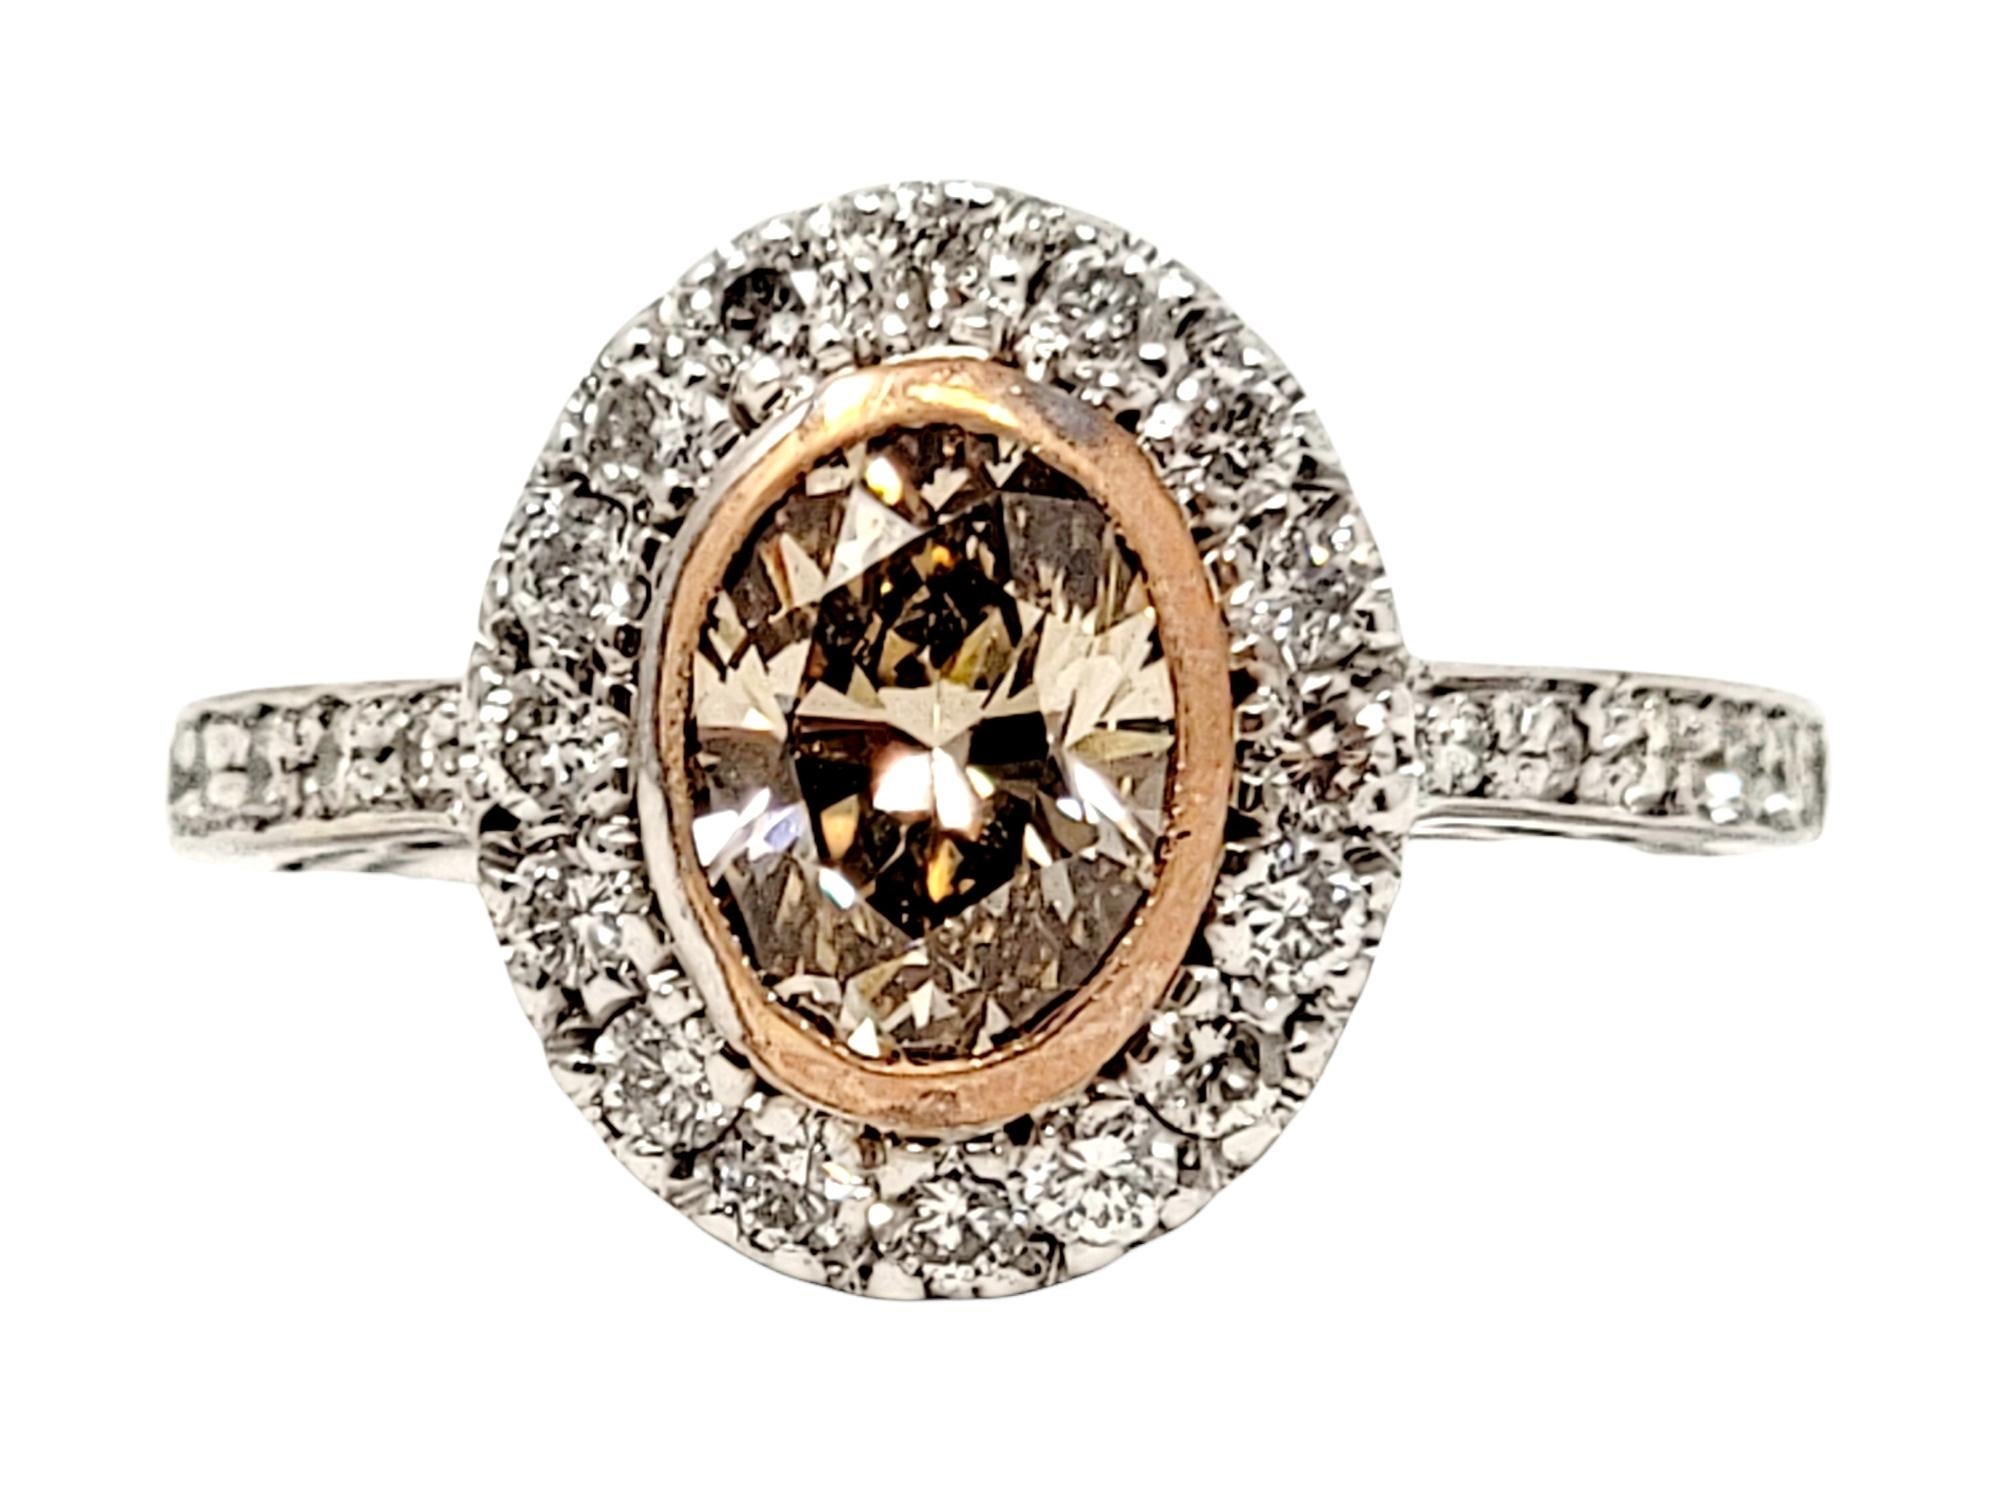 Ring size: 3.75

This absolutely gorgeous champagne diamond halo ring will light up your finger! It features a sparkling 1.00 carat Fancy Light Brown oval brilliant cut natural diamond bezel set in yellow gold at the center of the piece. Surrounding